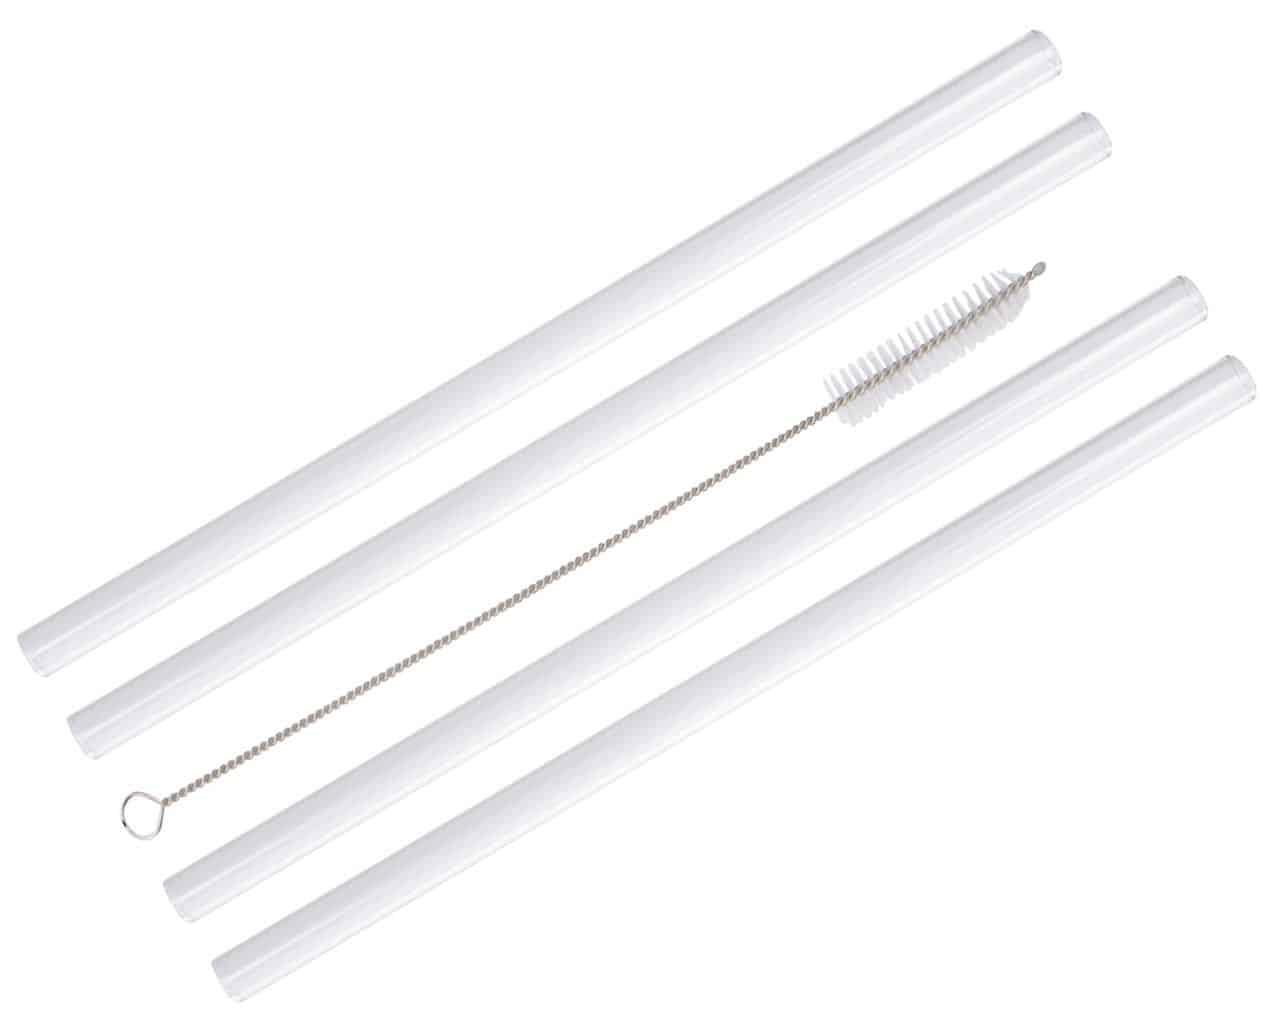 Extra long thick glass straws for half gallon Mason jars. 11.5" long, 9mm diameter. 4 pack + straw cleaner